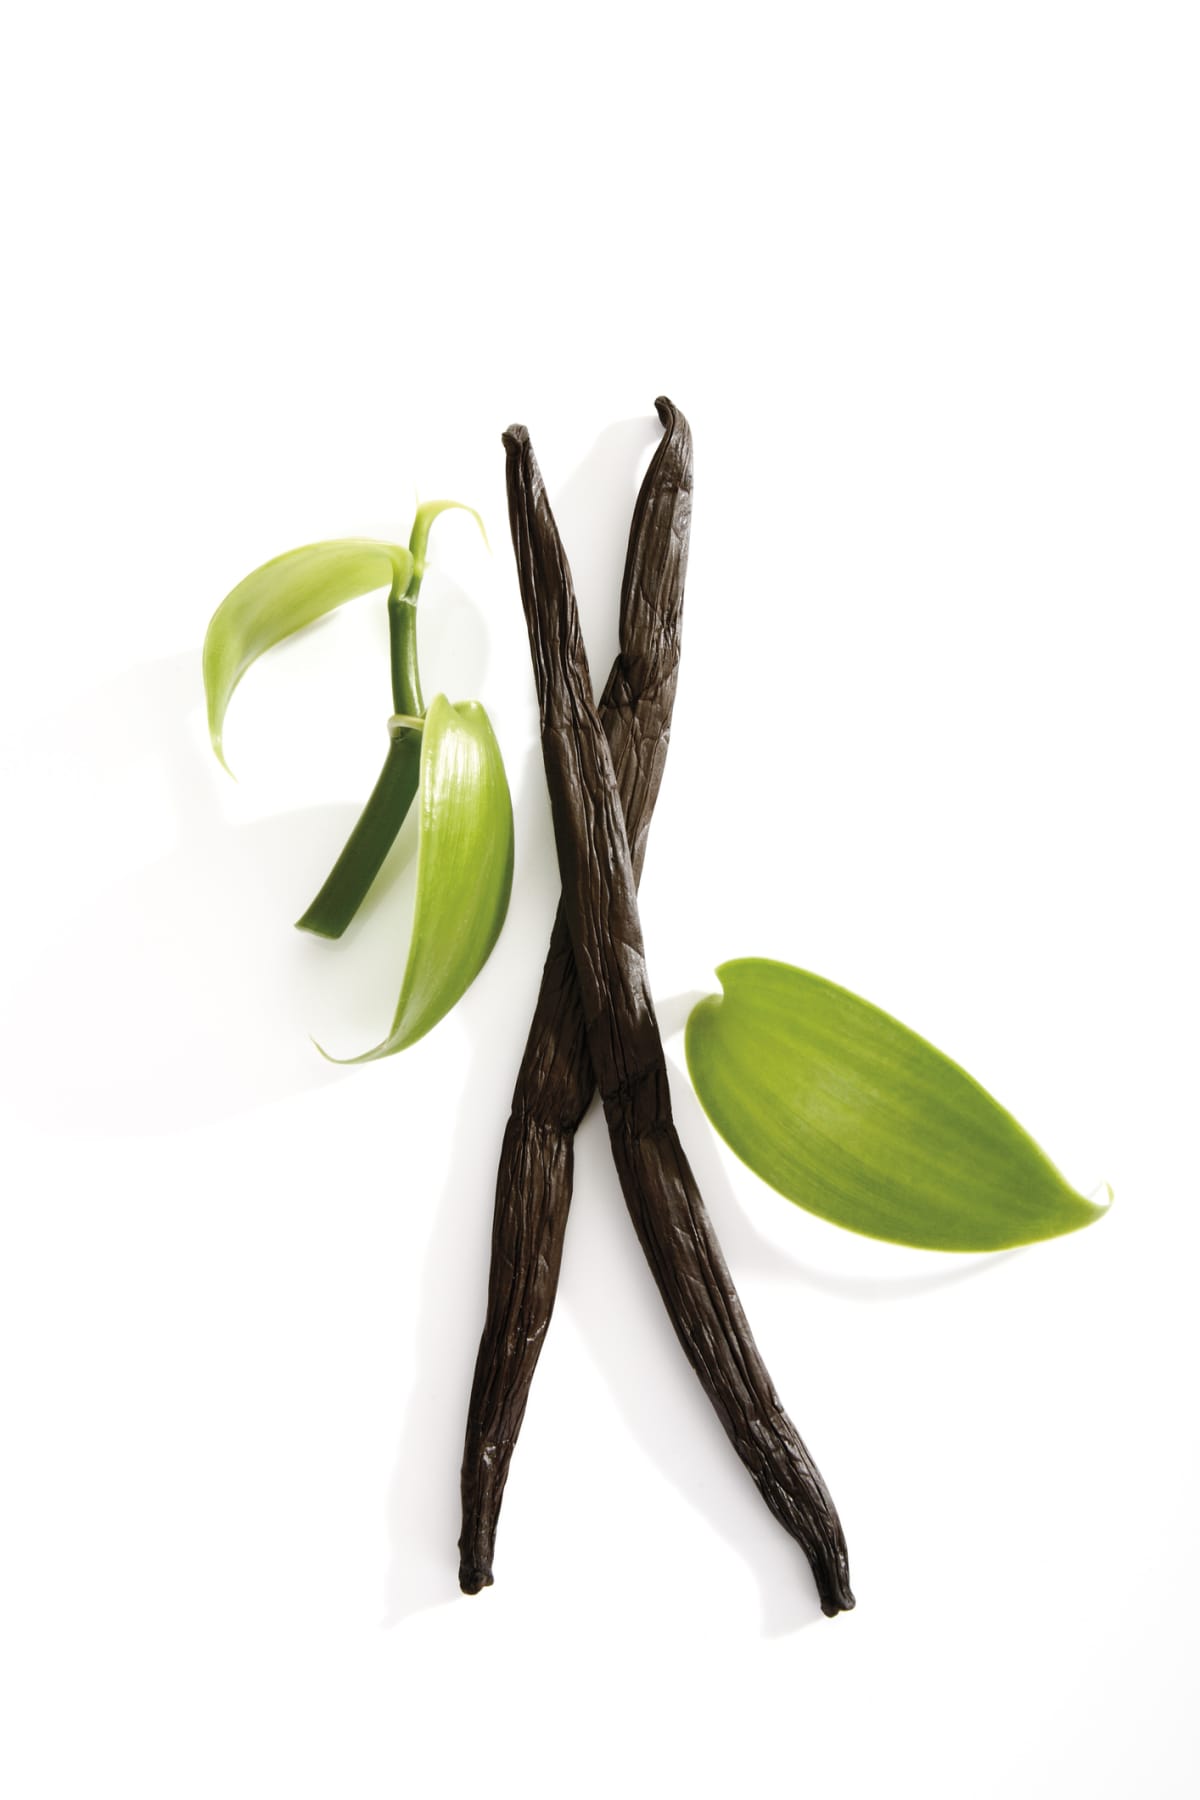 Vanilla beans on a green stone. (Photo by: Paolo Picciotto/REDA&CO/Universal Images Group via Getty Images)